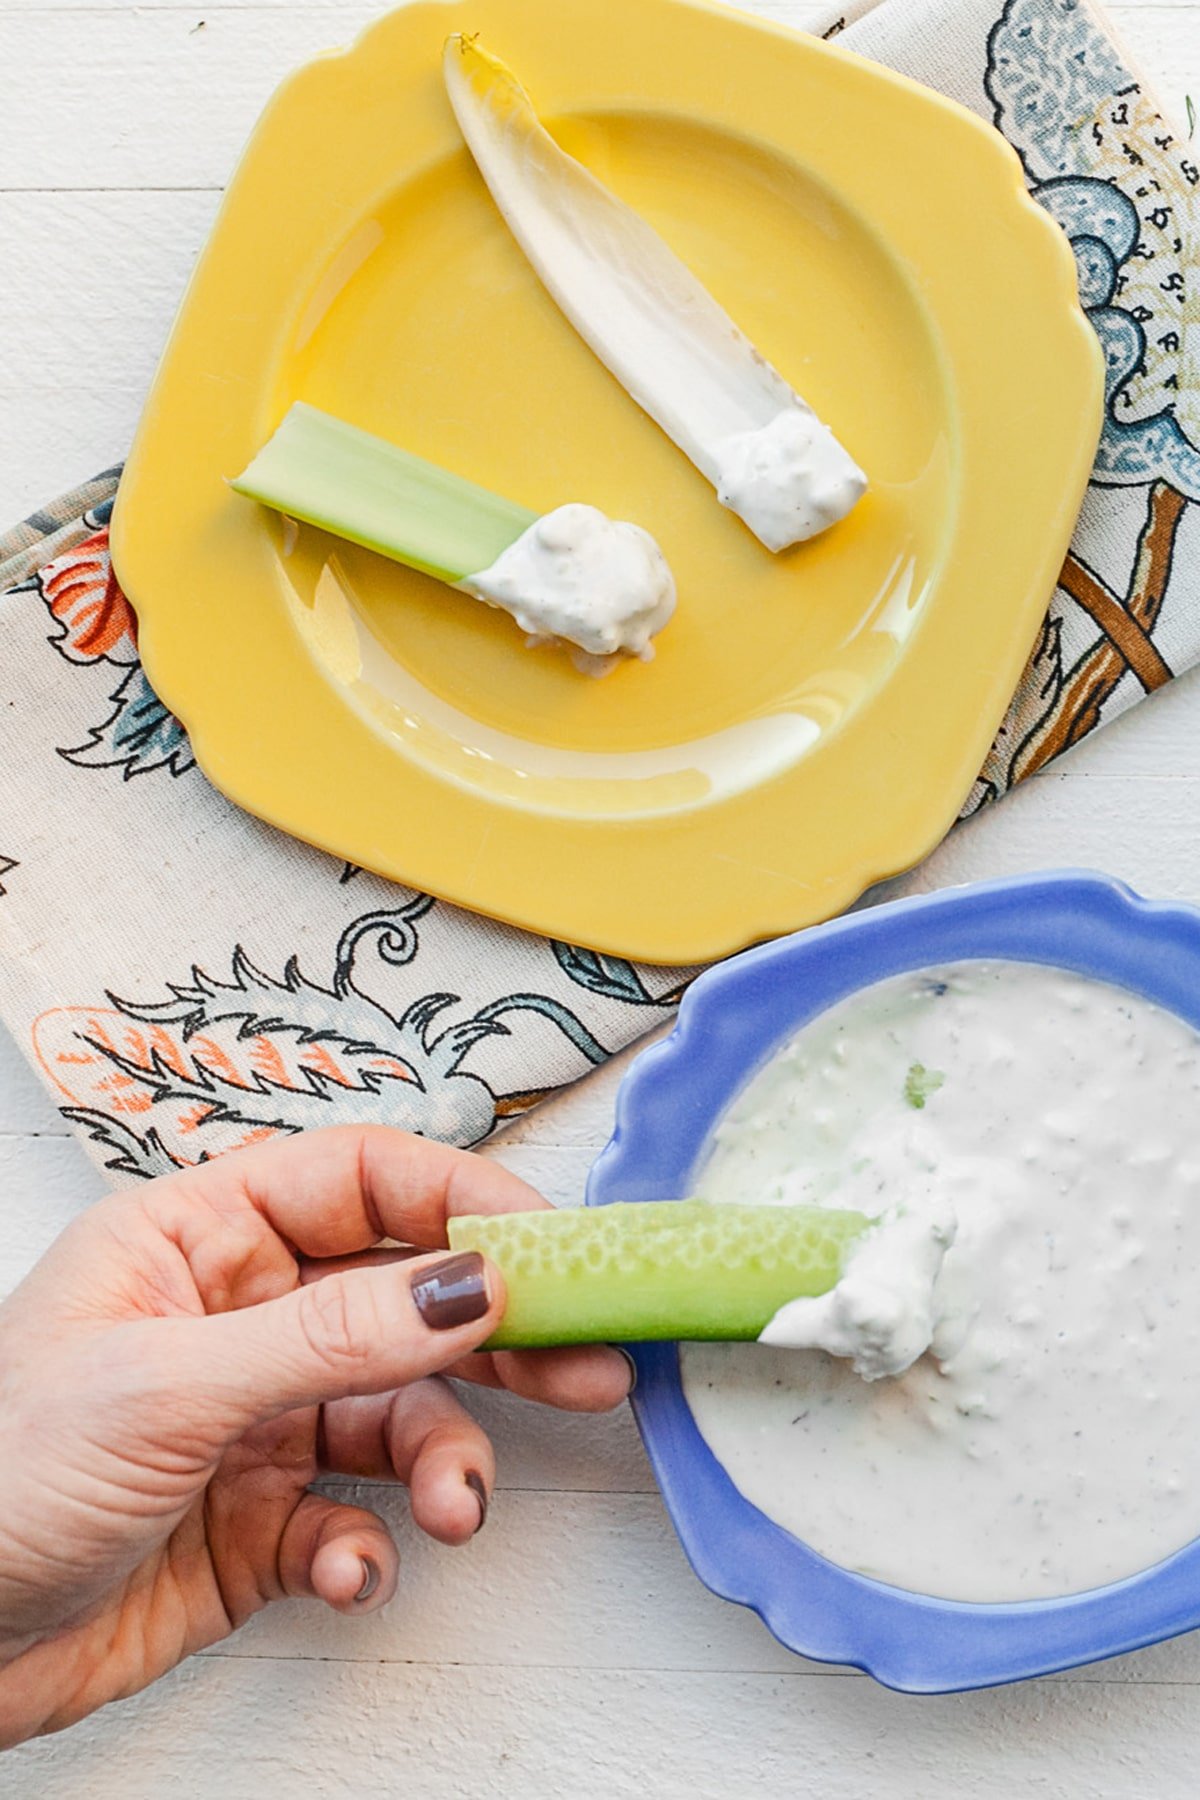 Celery dipped in blue cheese dressing on a plate.